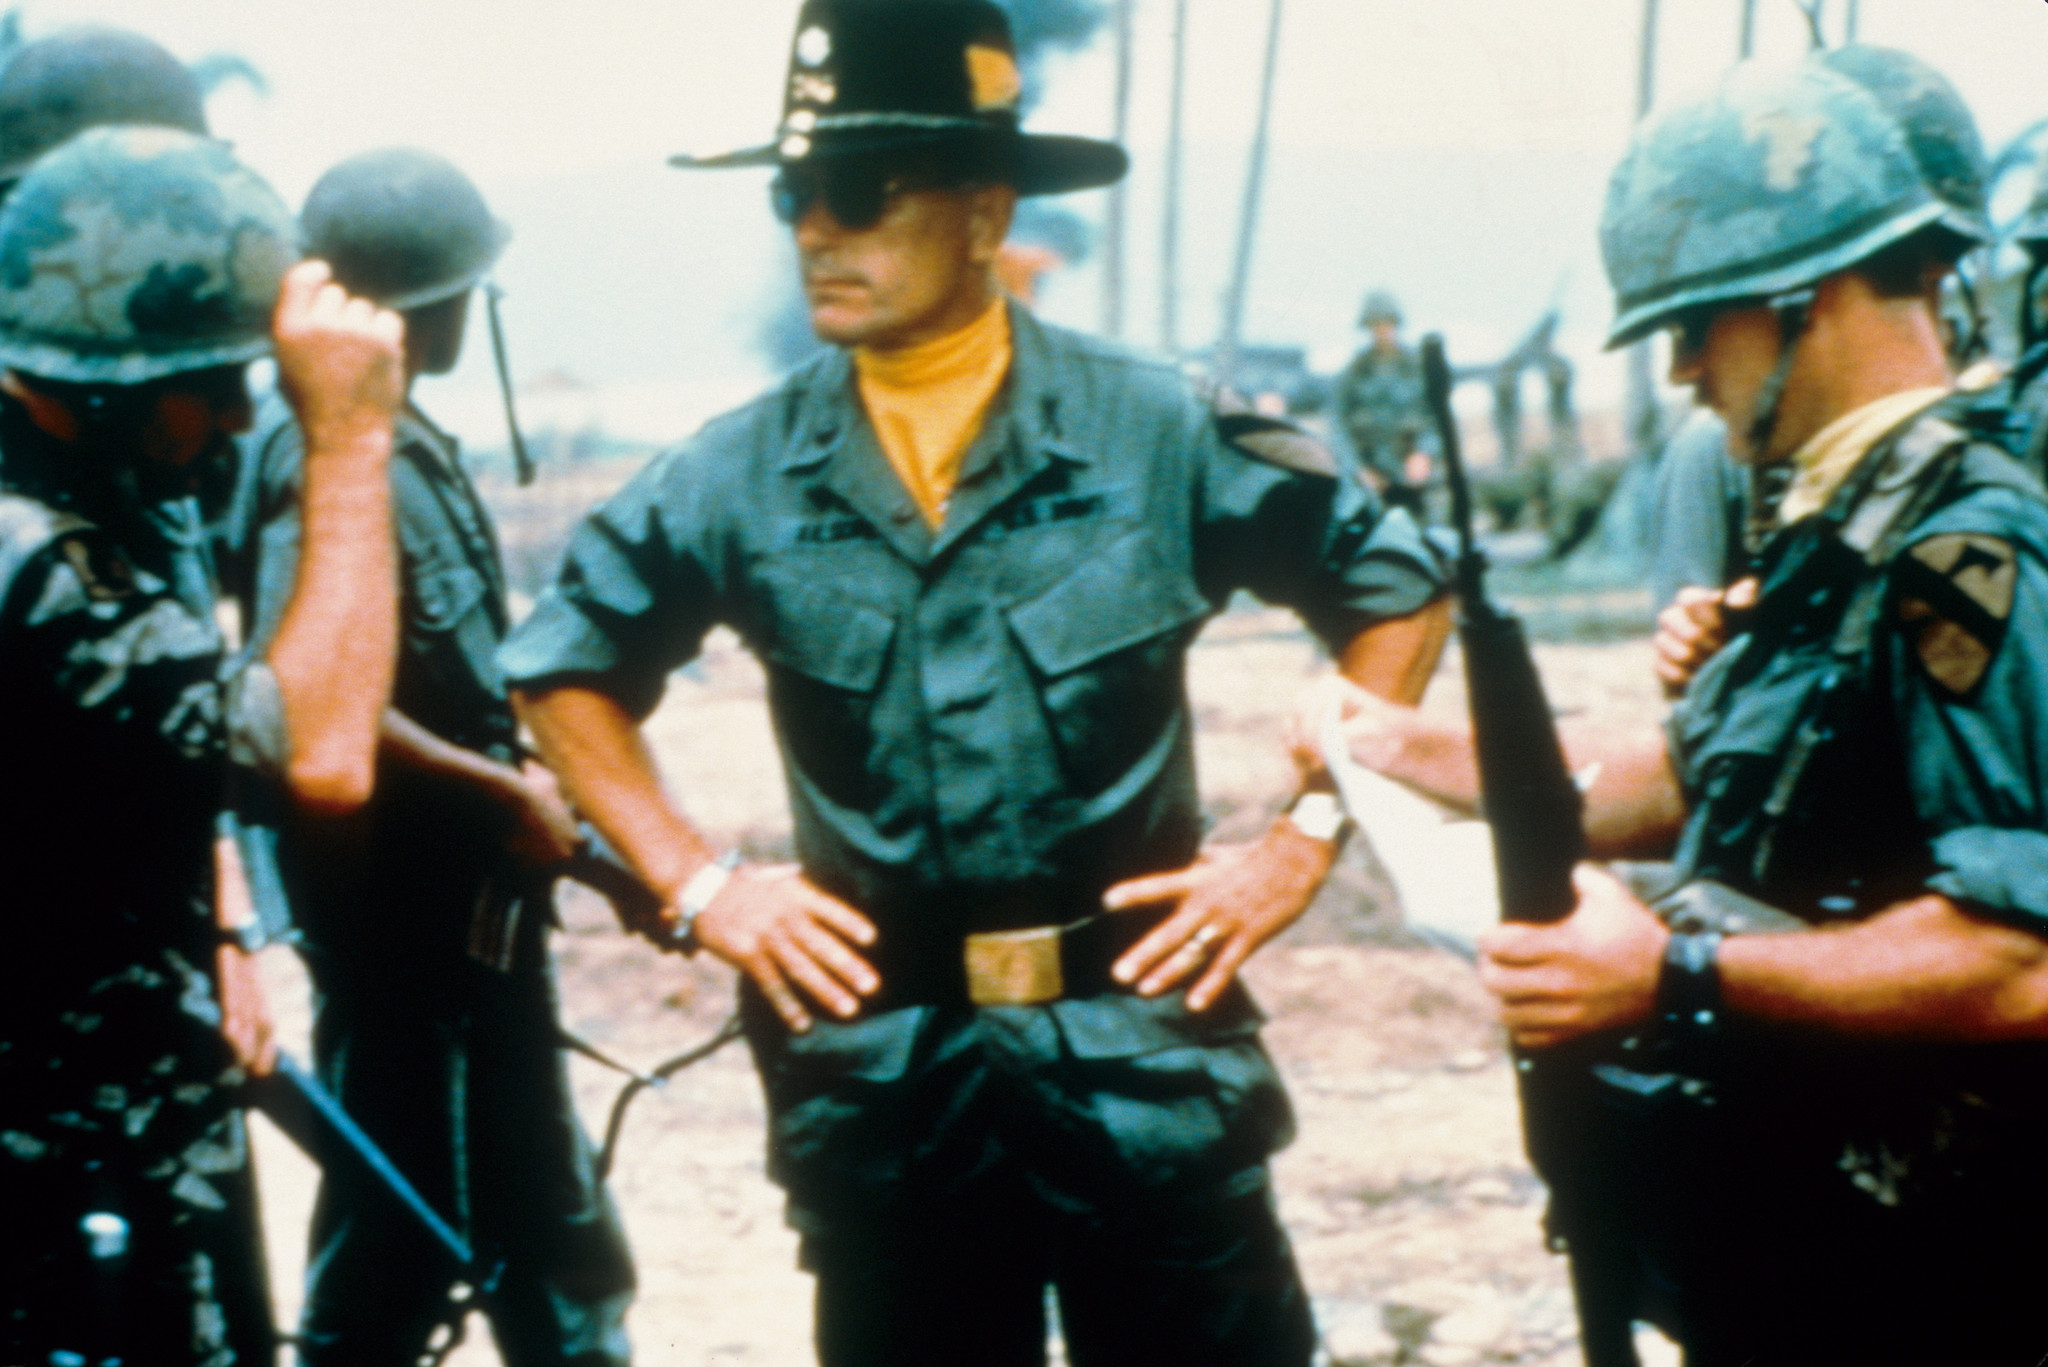 Robert Duvall and Martin Sheen in Apocalypse Now (1979)